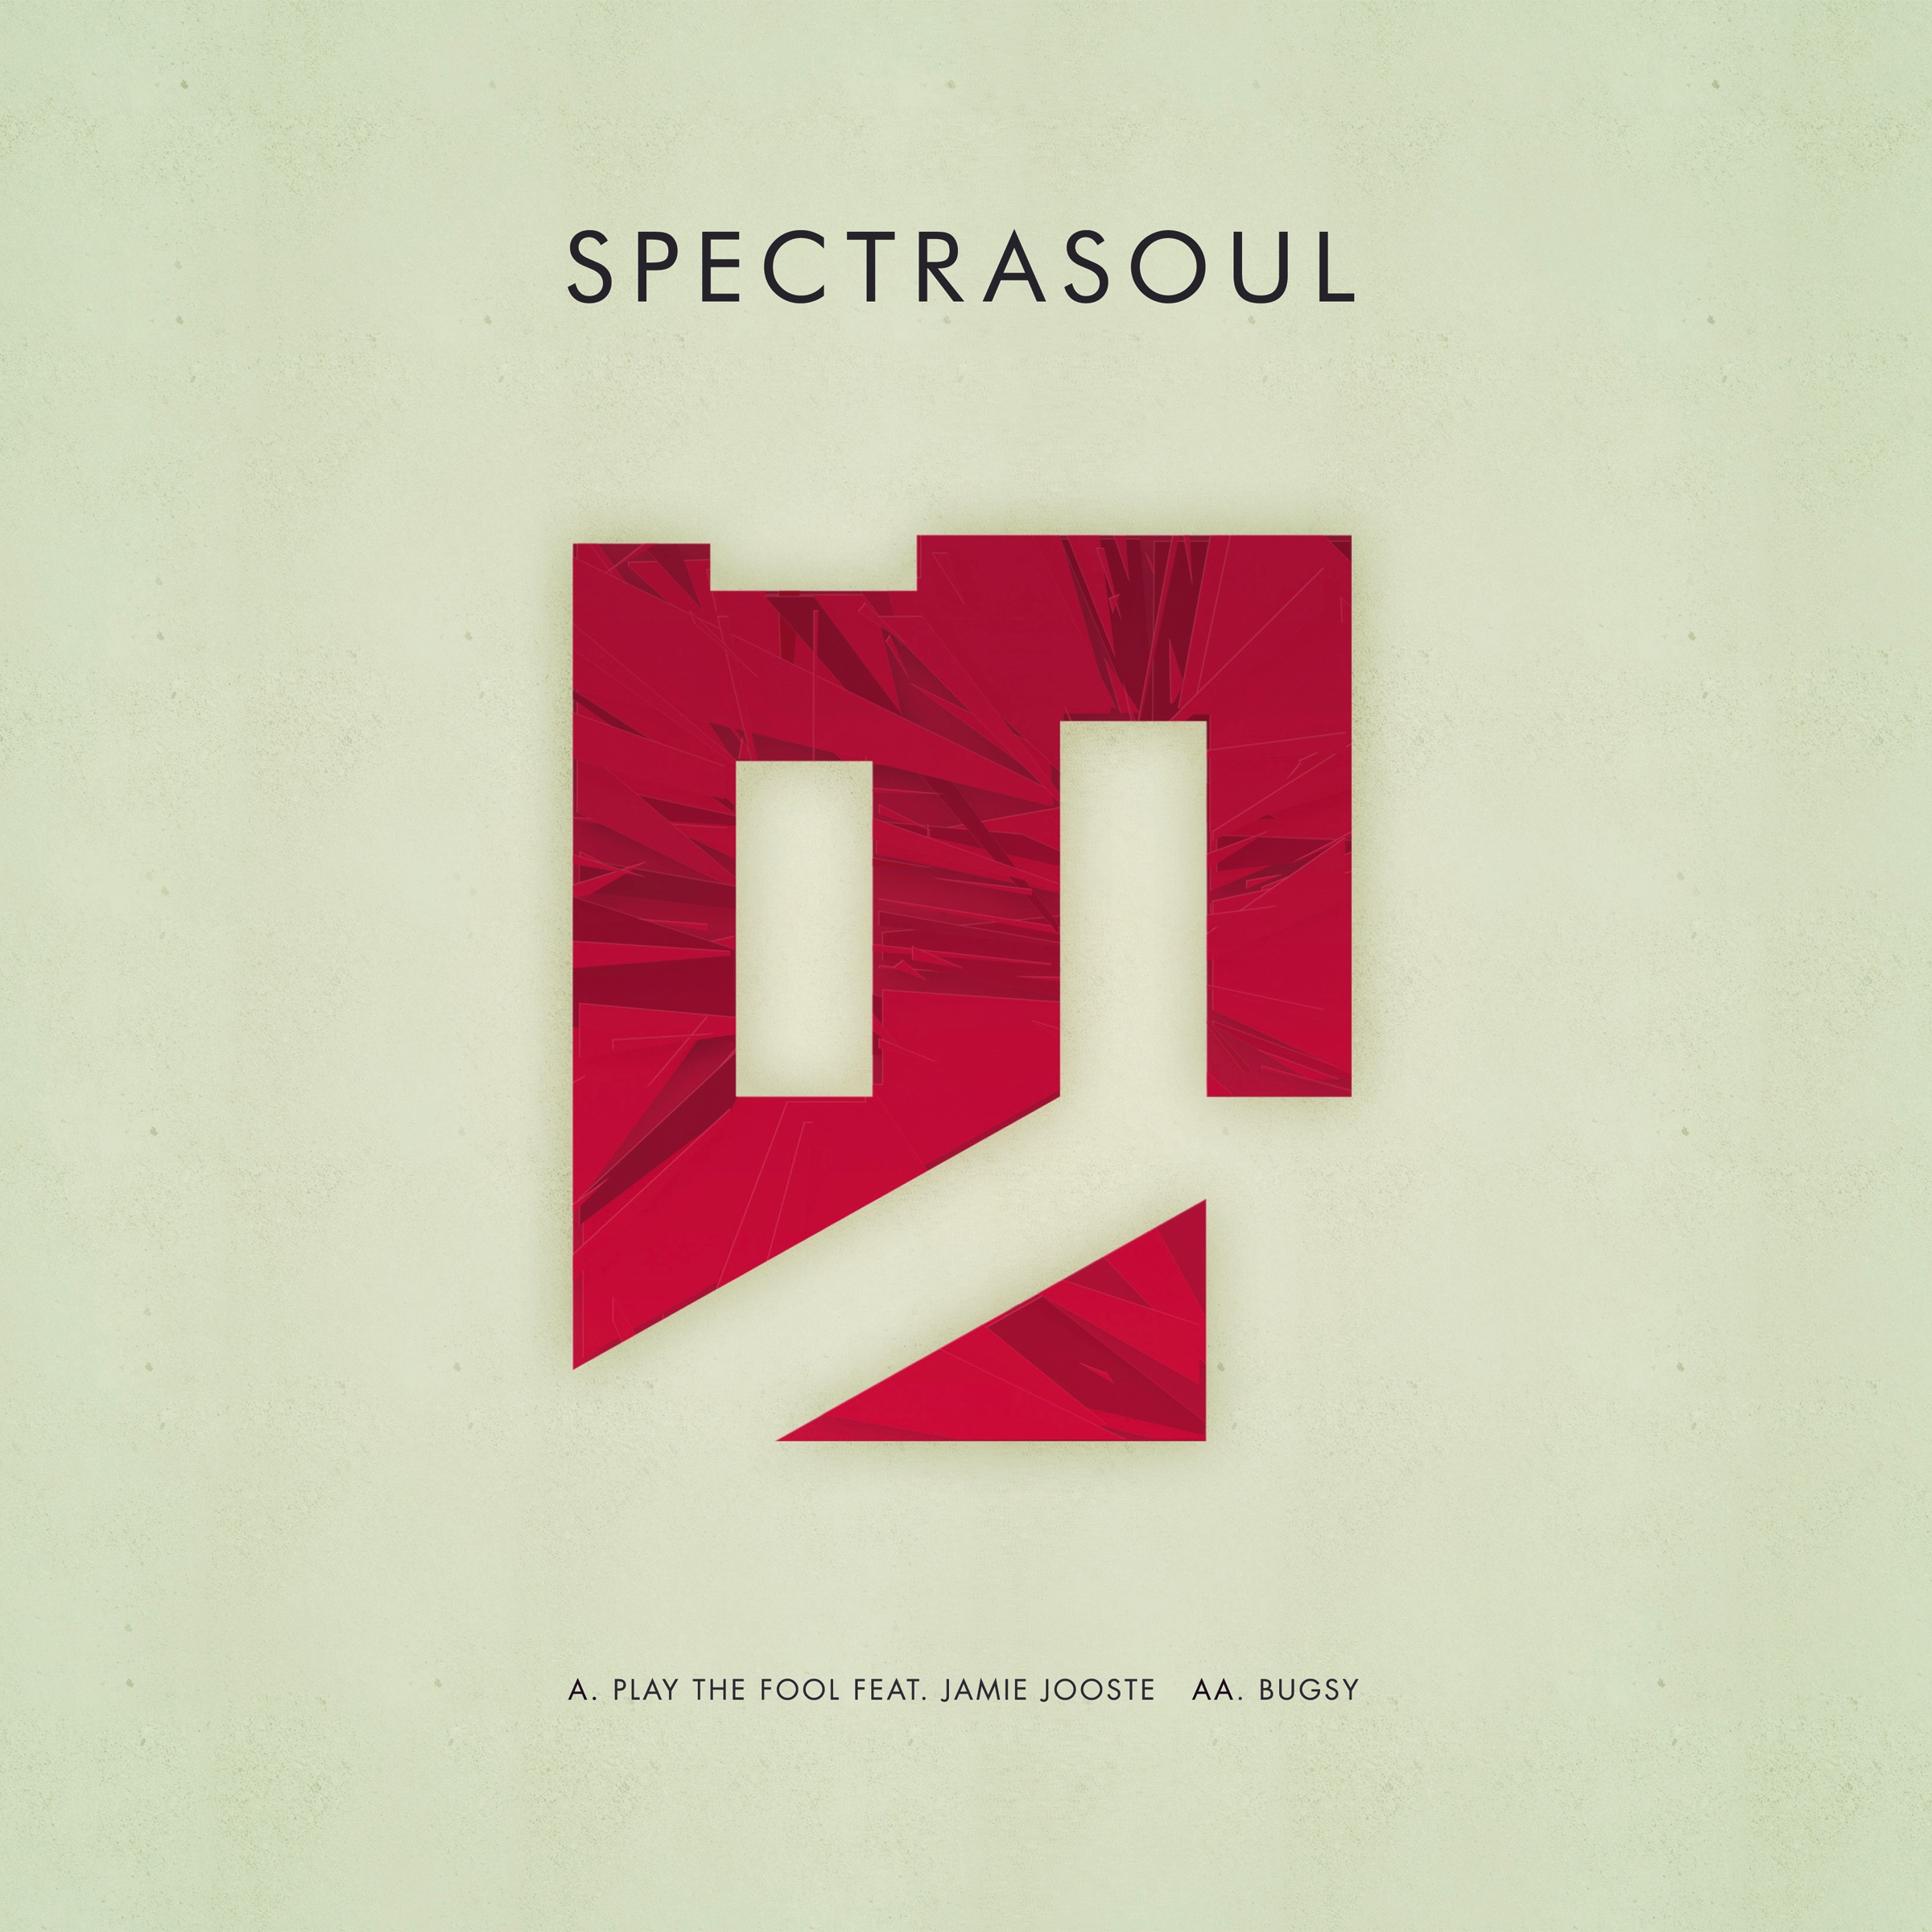 Spectrasoul/PLAY THE FOOL 12"